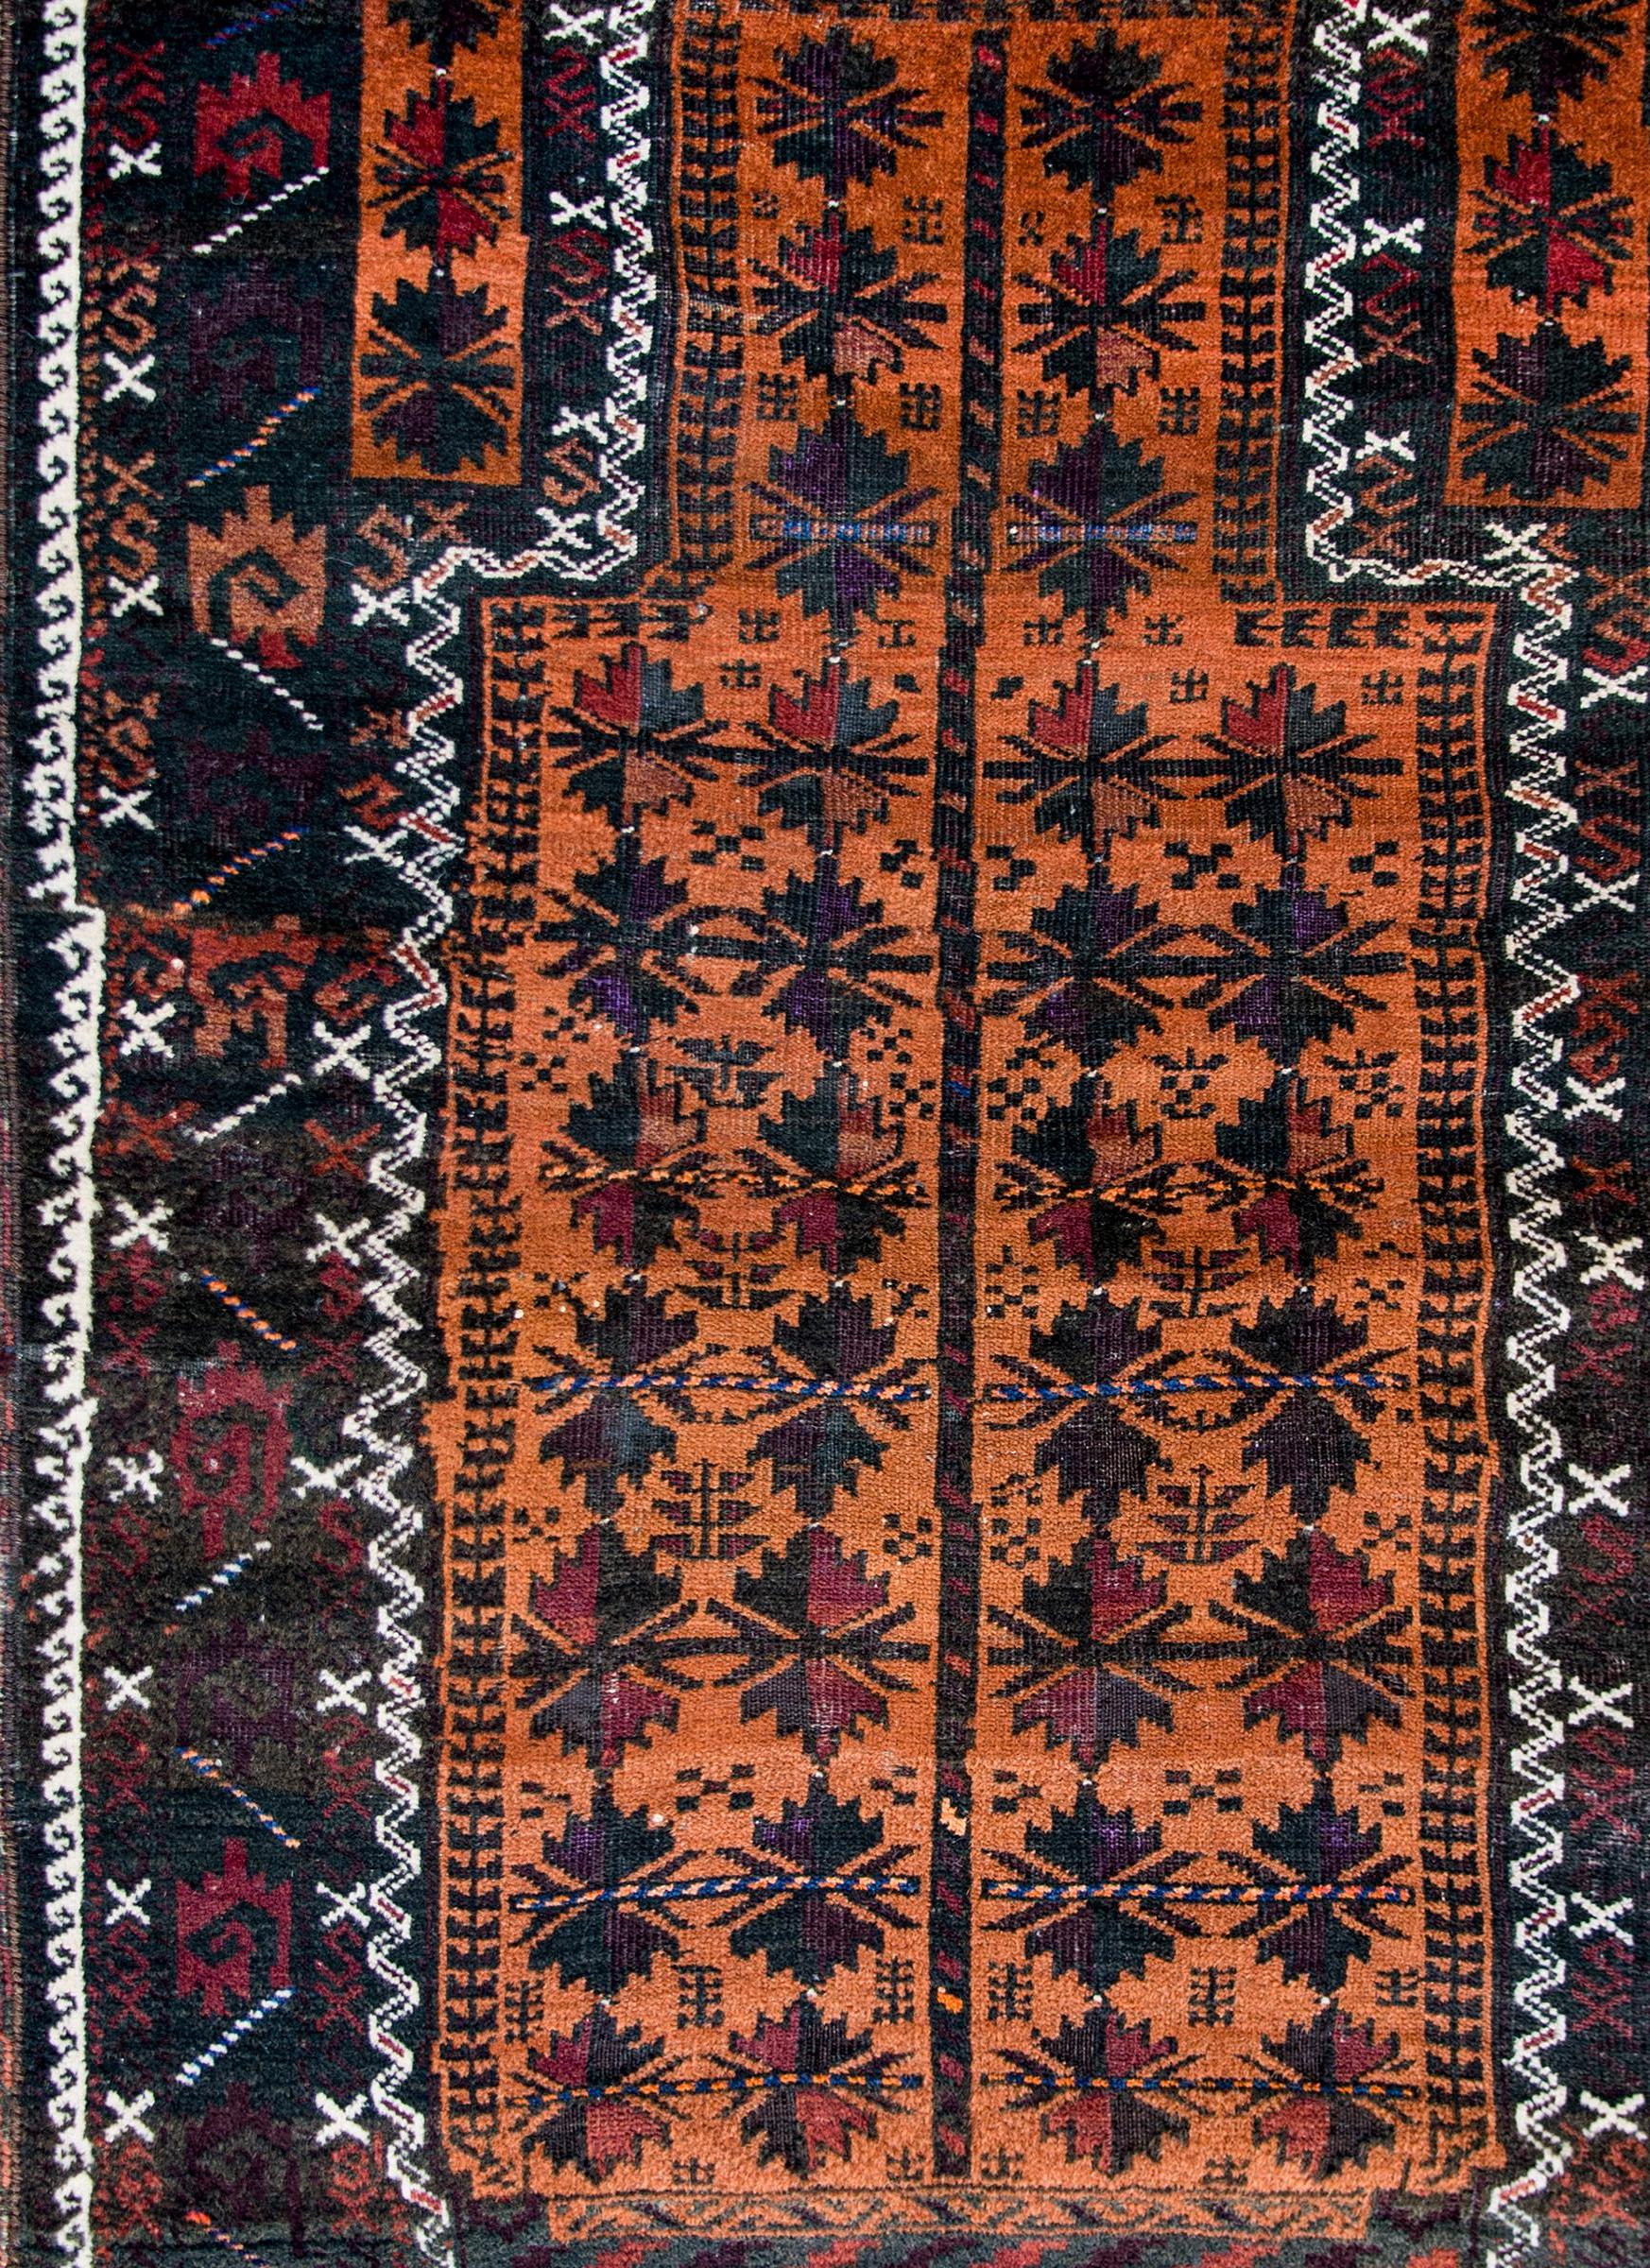 An early 20th century Persian Baluch prayer rug with an all-over floral pattern woven in black and deep cranberry colored wool on an orange background surrounded by a complementary stylized floral border women in similar colors.